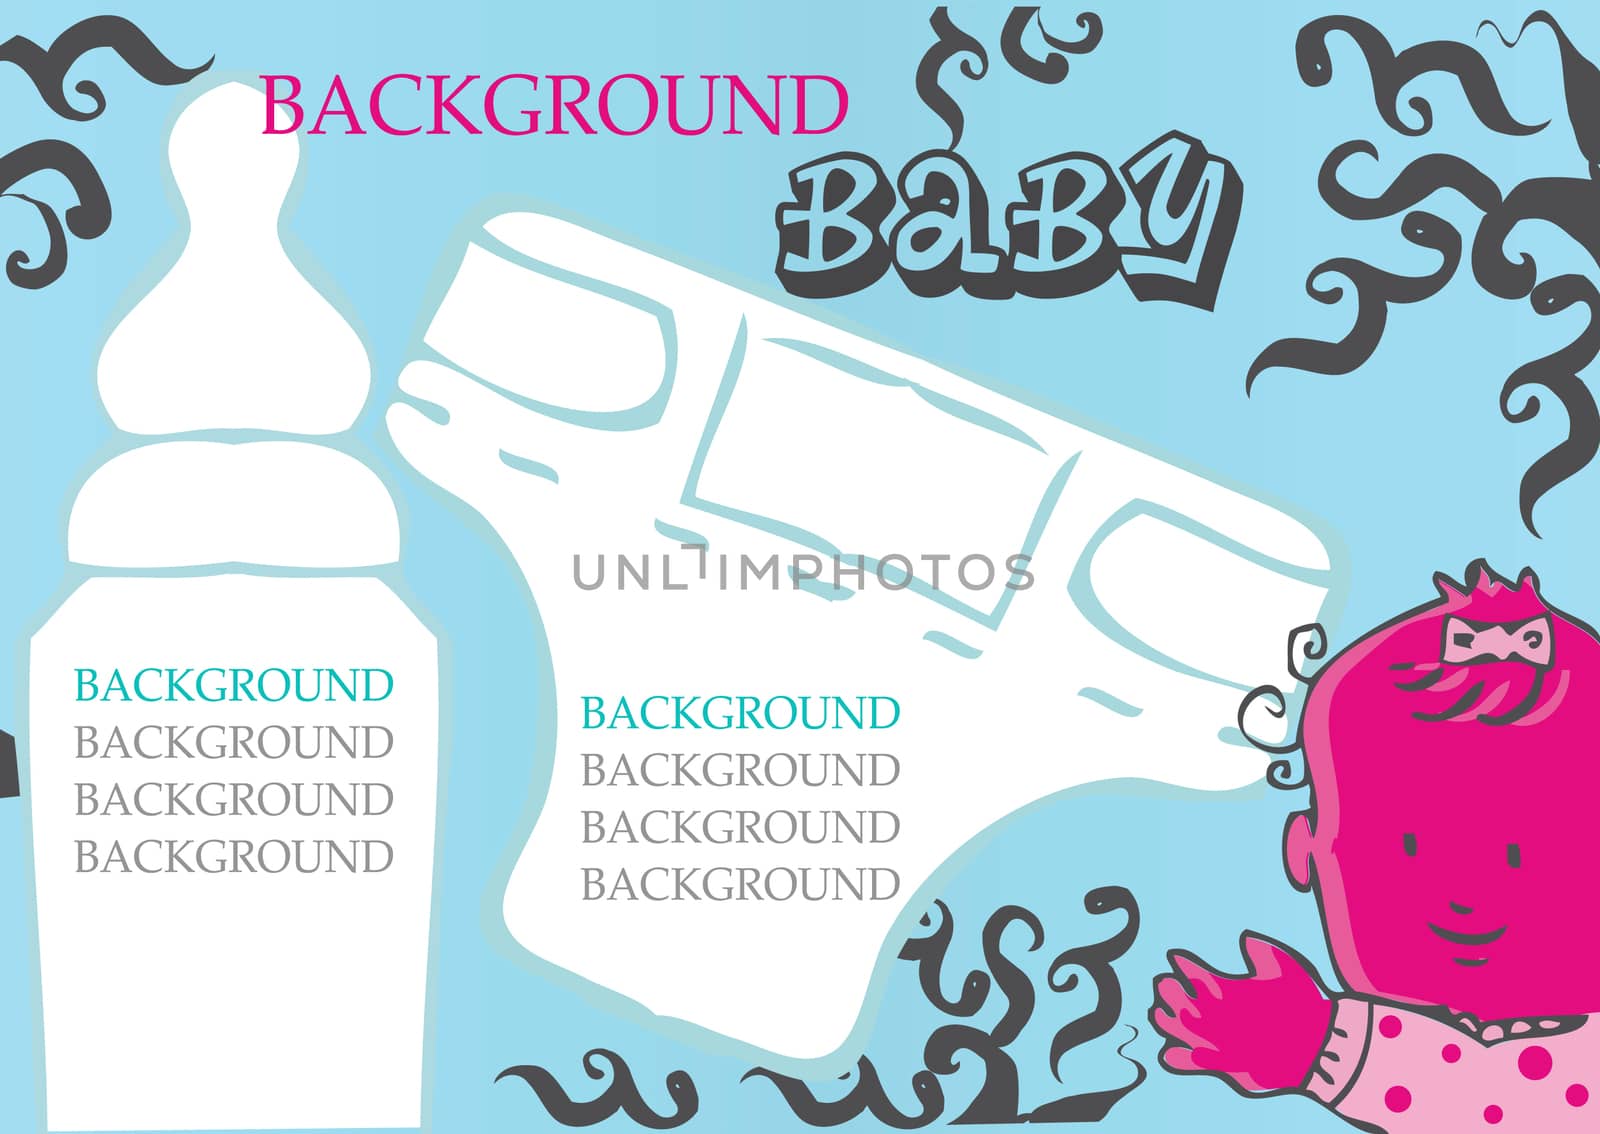 baby, child vector background, icons set girl, food, care icons